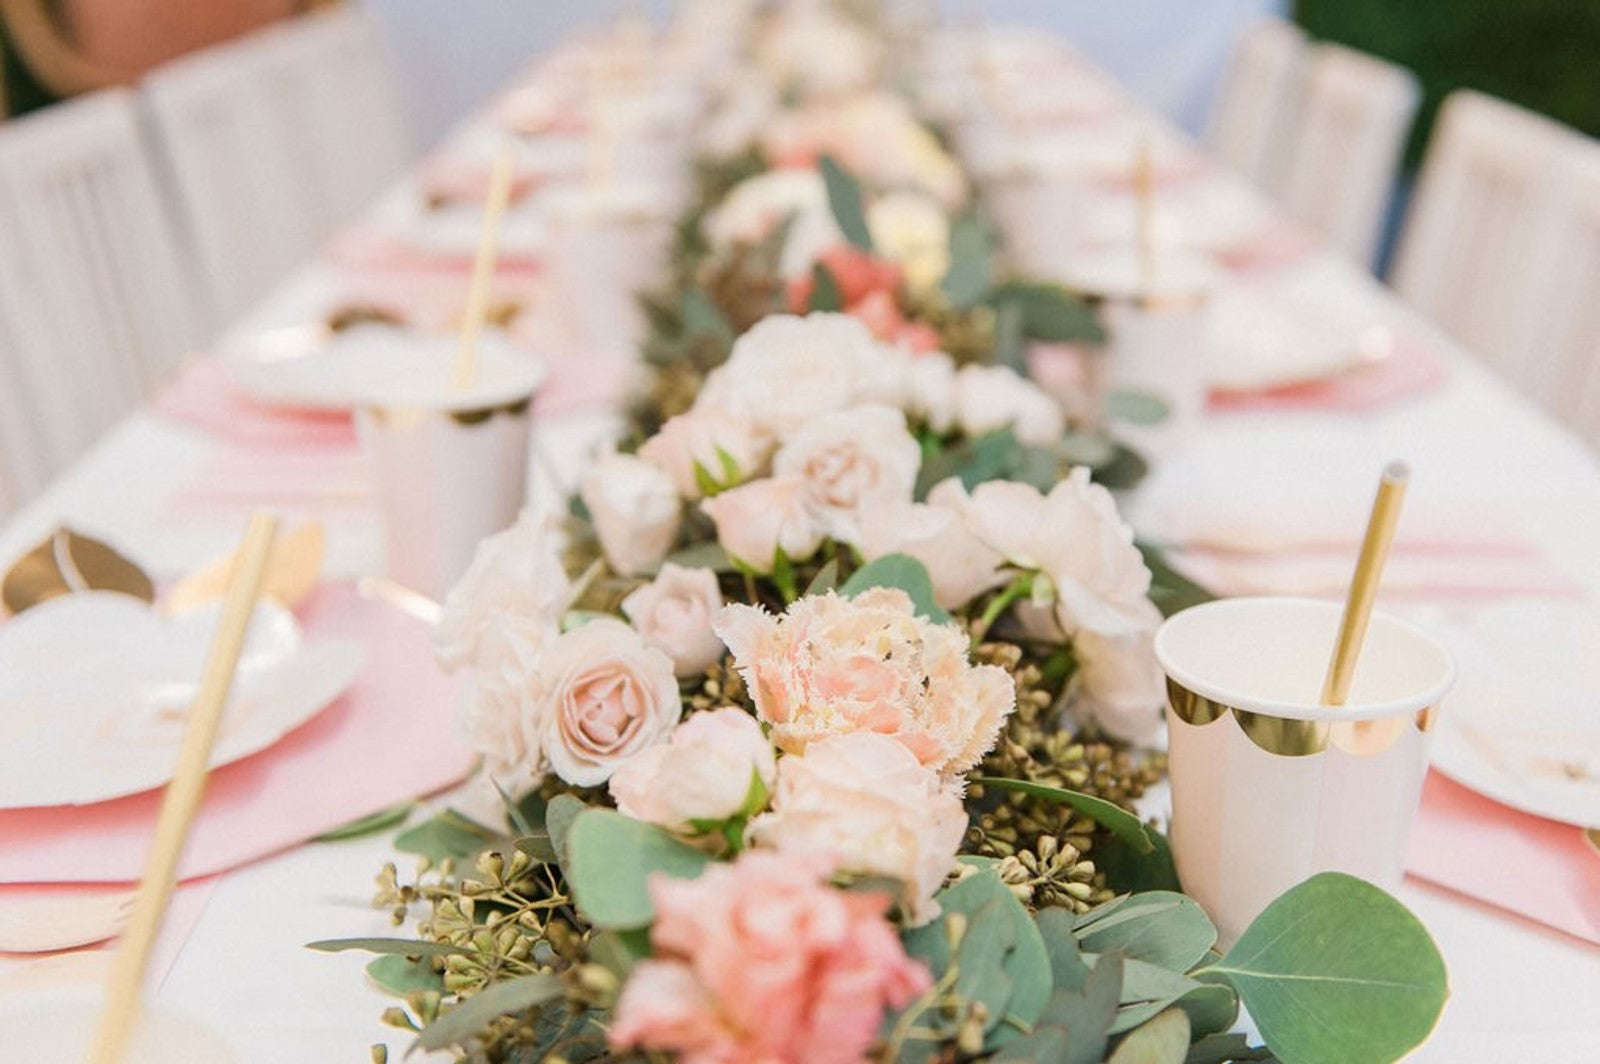 A beautiful table scape with pink and gold plates, flowers, napkins, and cups